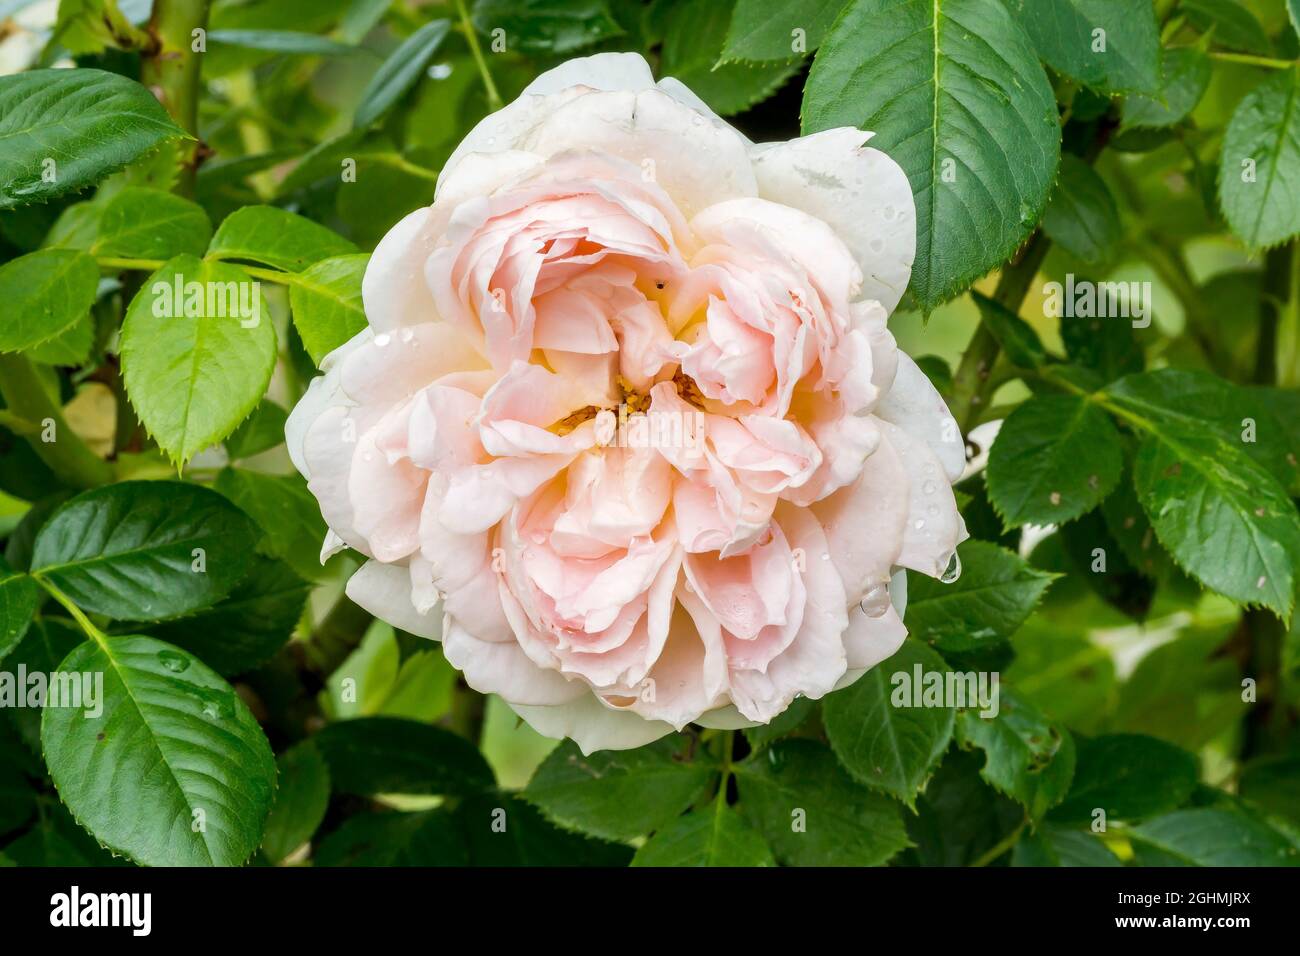 Rose tree Martin Frobisher' in bloom in a garden Stock Photo - Alamy